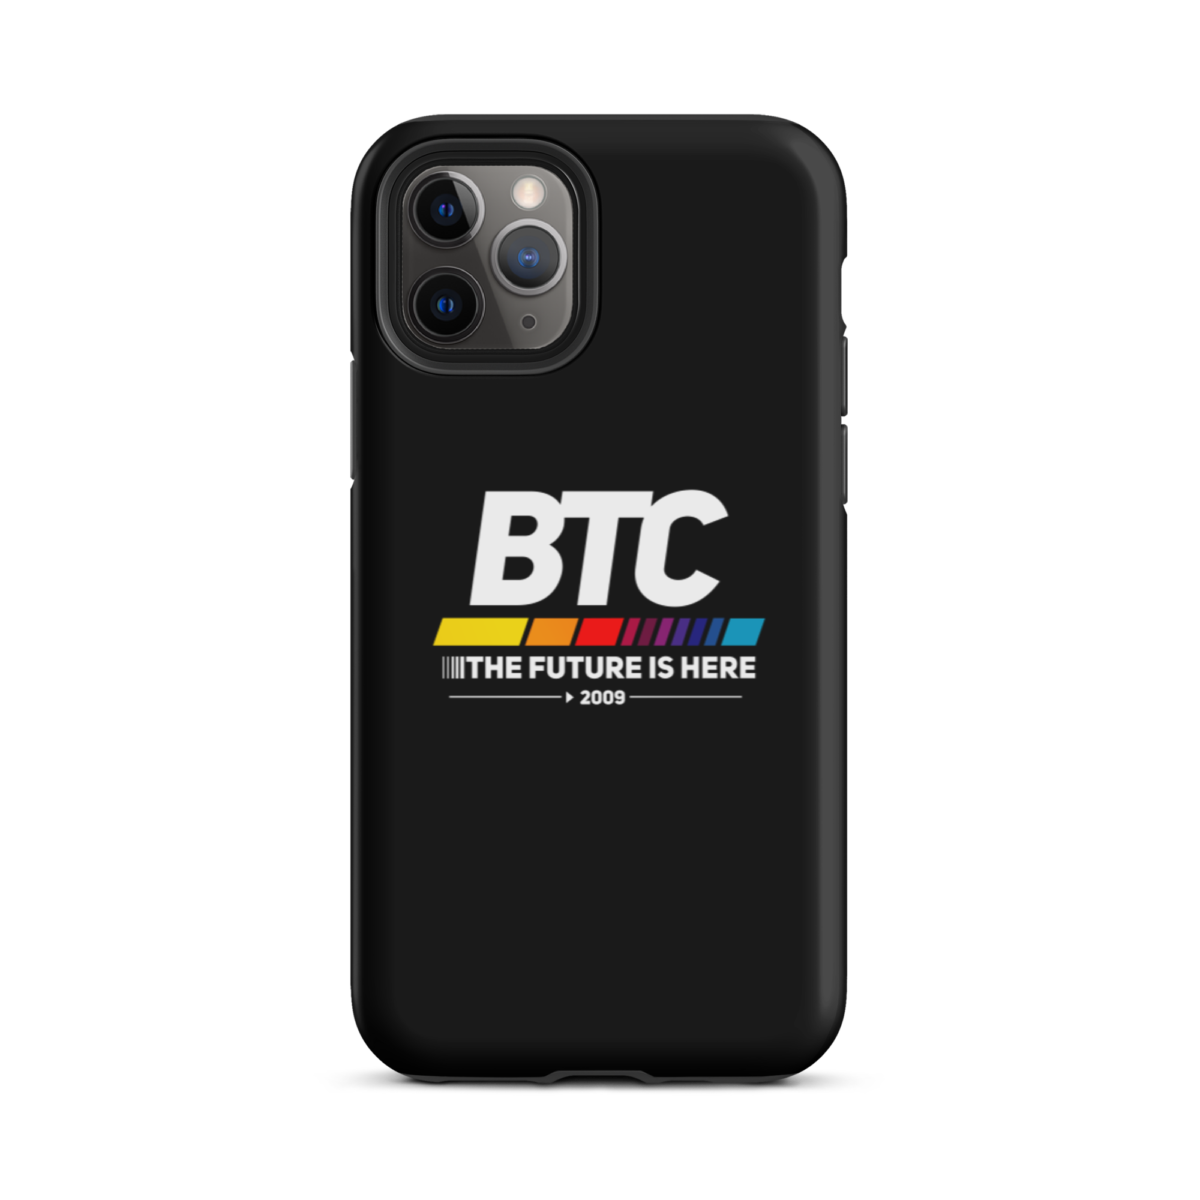 tough iphone case glossy iphone 11 pro front 6345d56a30f84 - BTC: The Future Is Here Tough iPhone Case